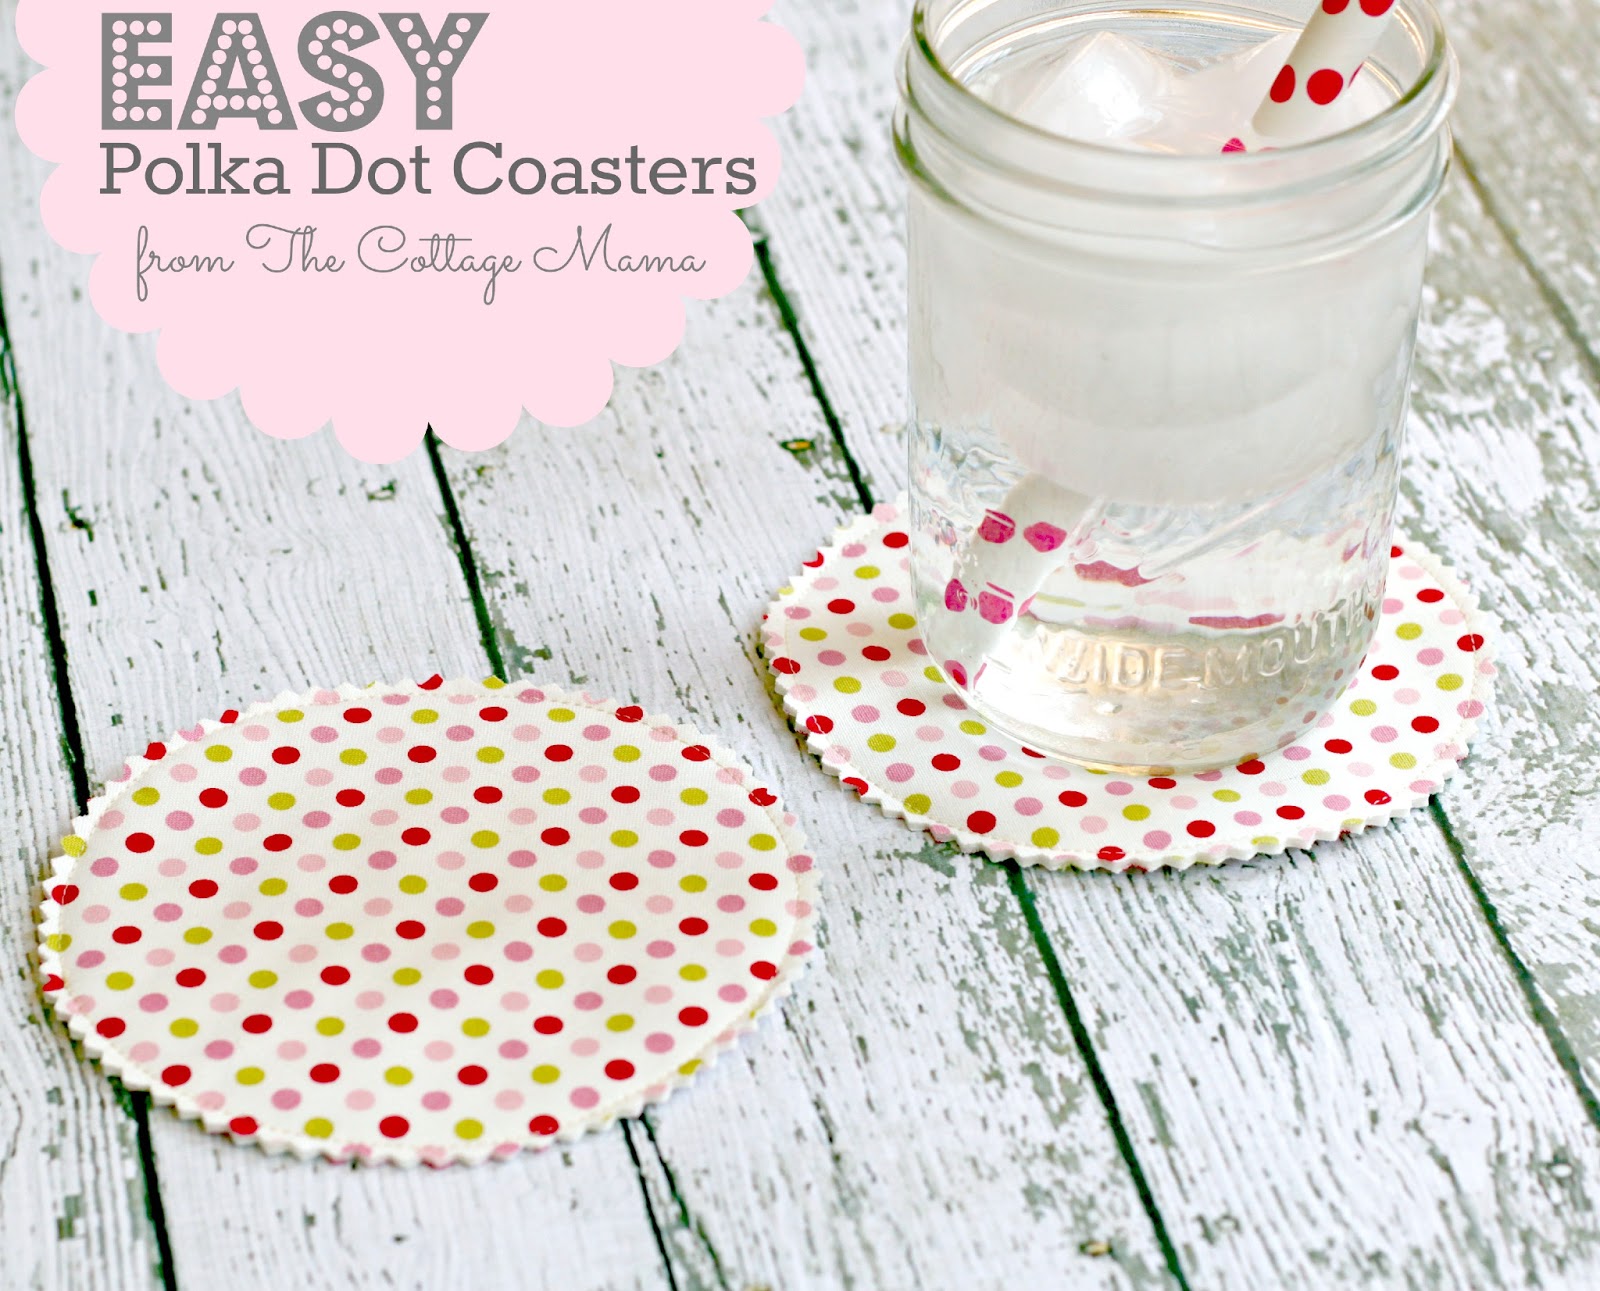 Polka Dot Coasters by the Cottage Mama